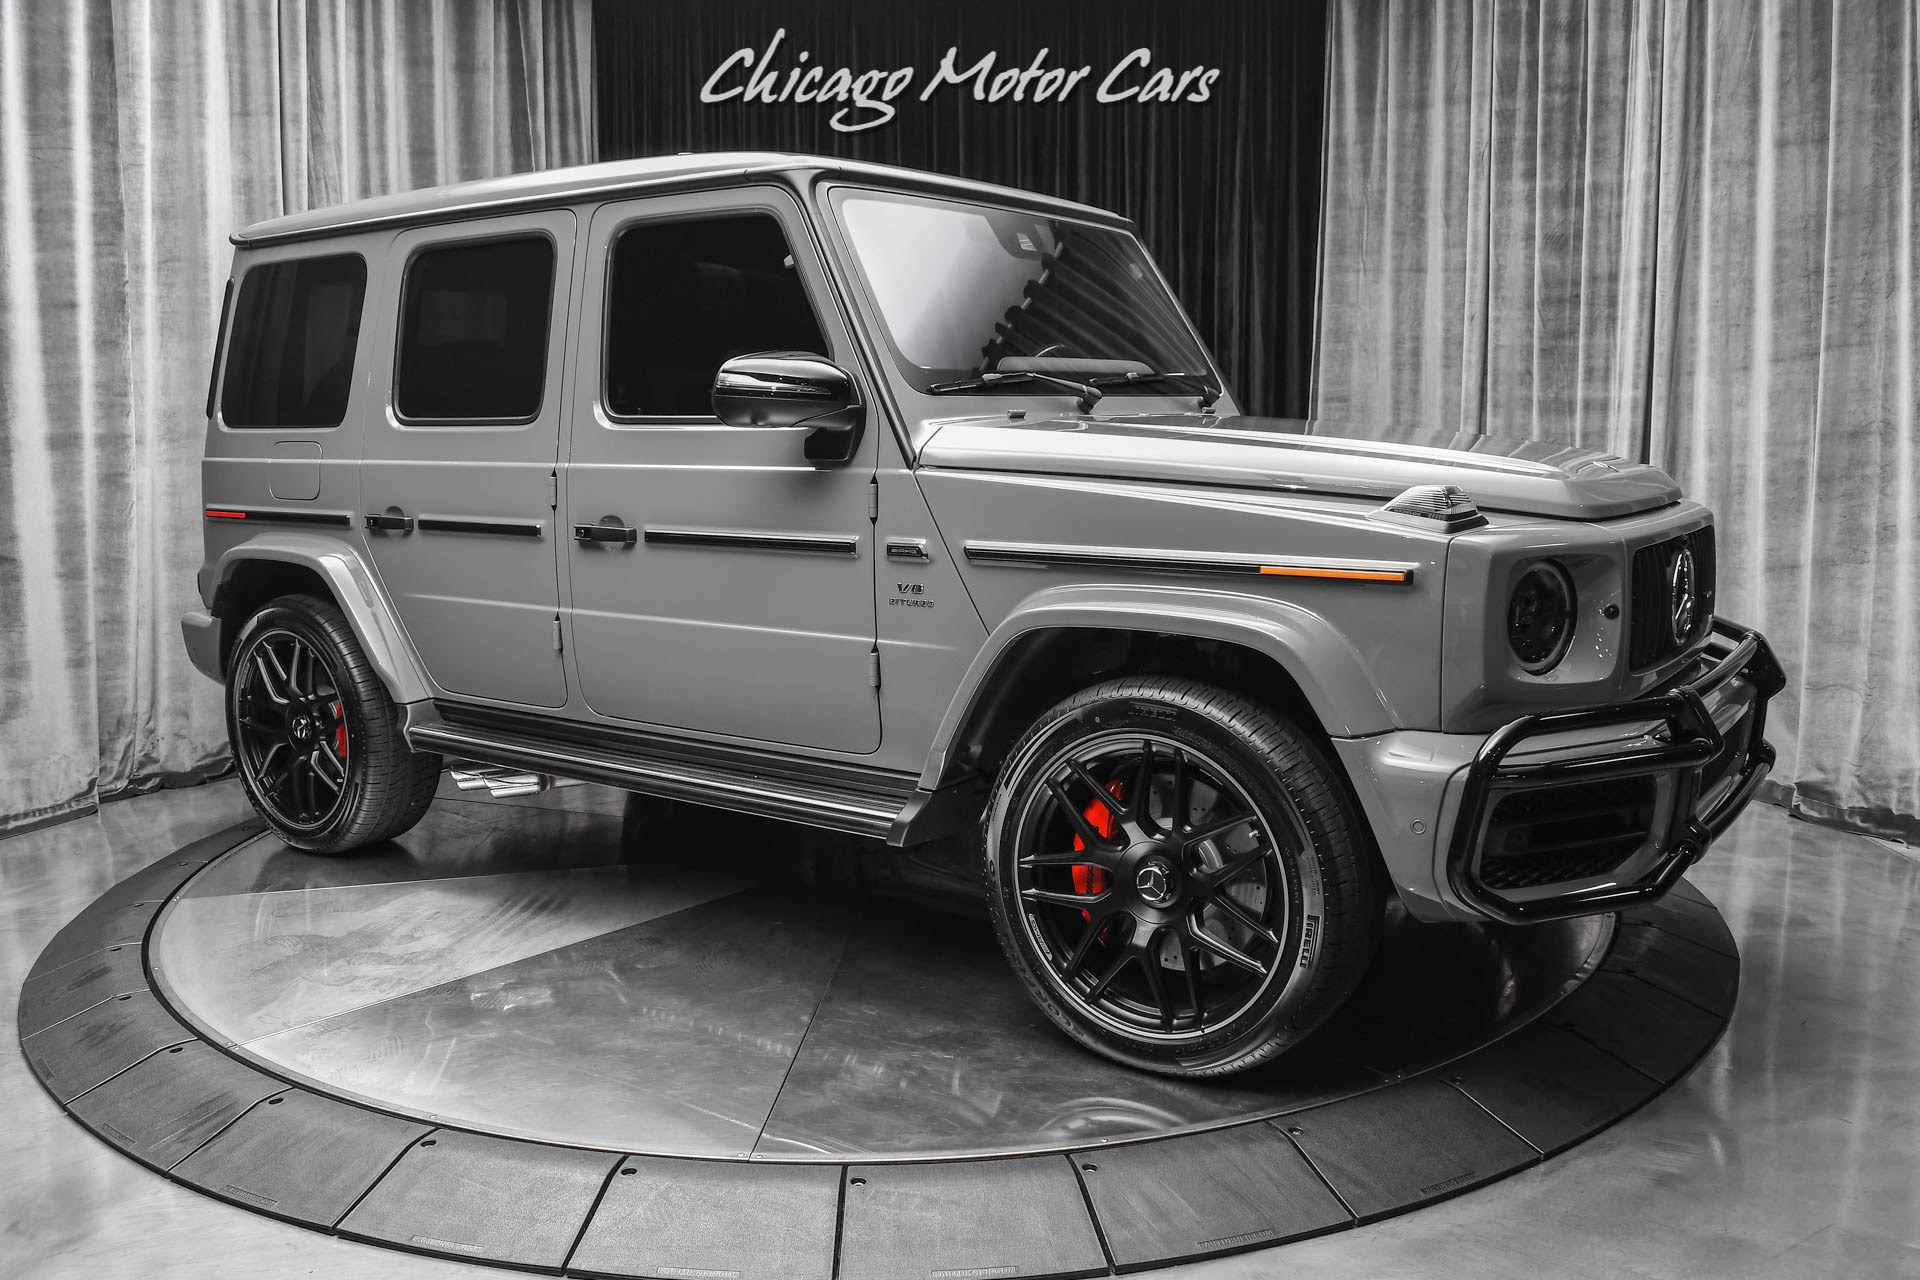 Used 21 Mercedes Benz G63 Amg Suv Rare Arabian Grey Paint 81 Miles Carbon Fiber Interior Pack For Sale Special Pricing Chicago Motor Cars Stock